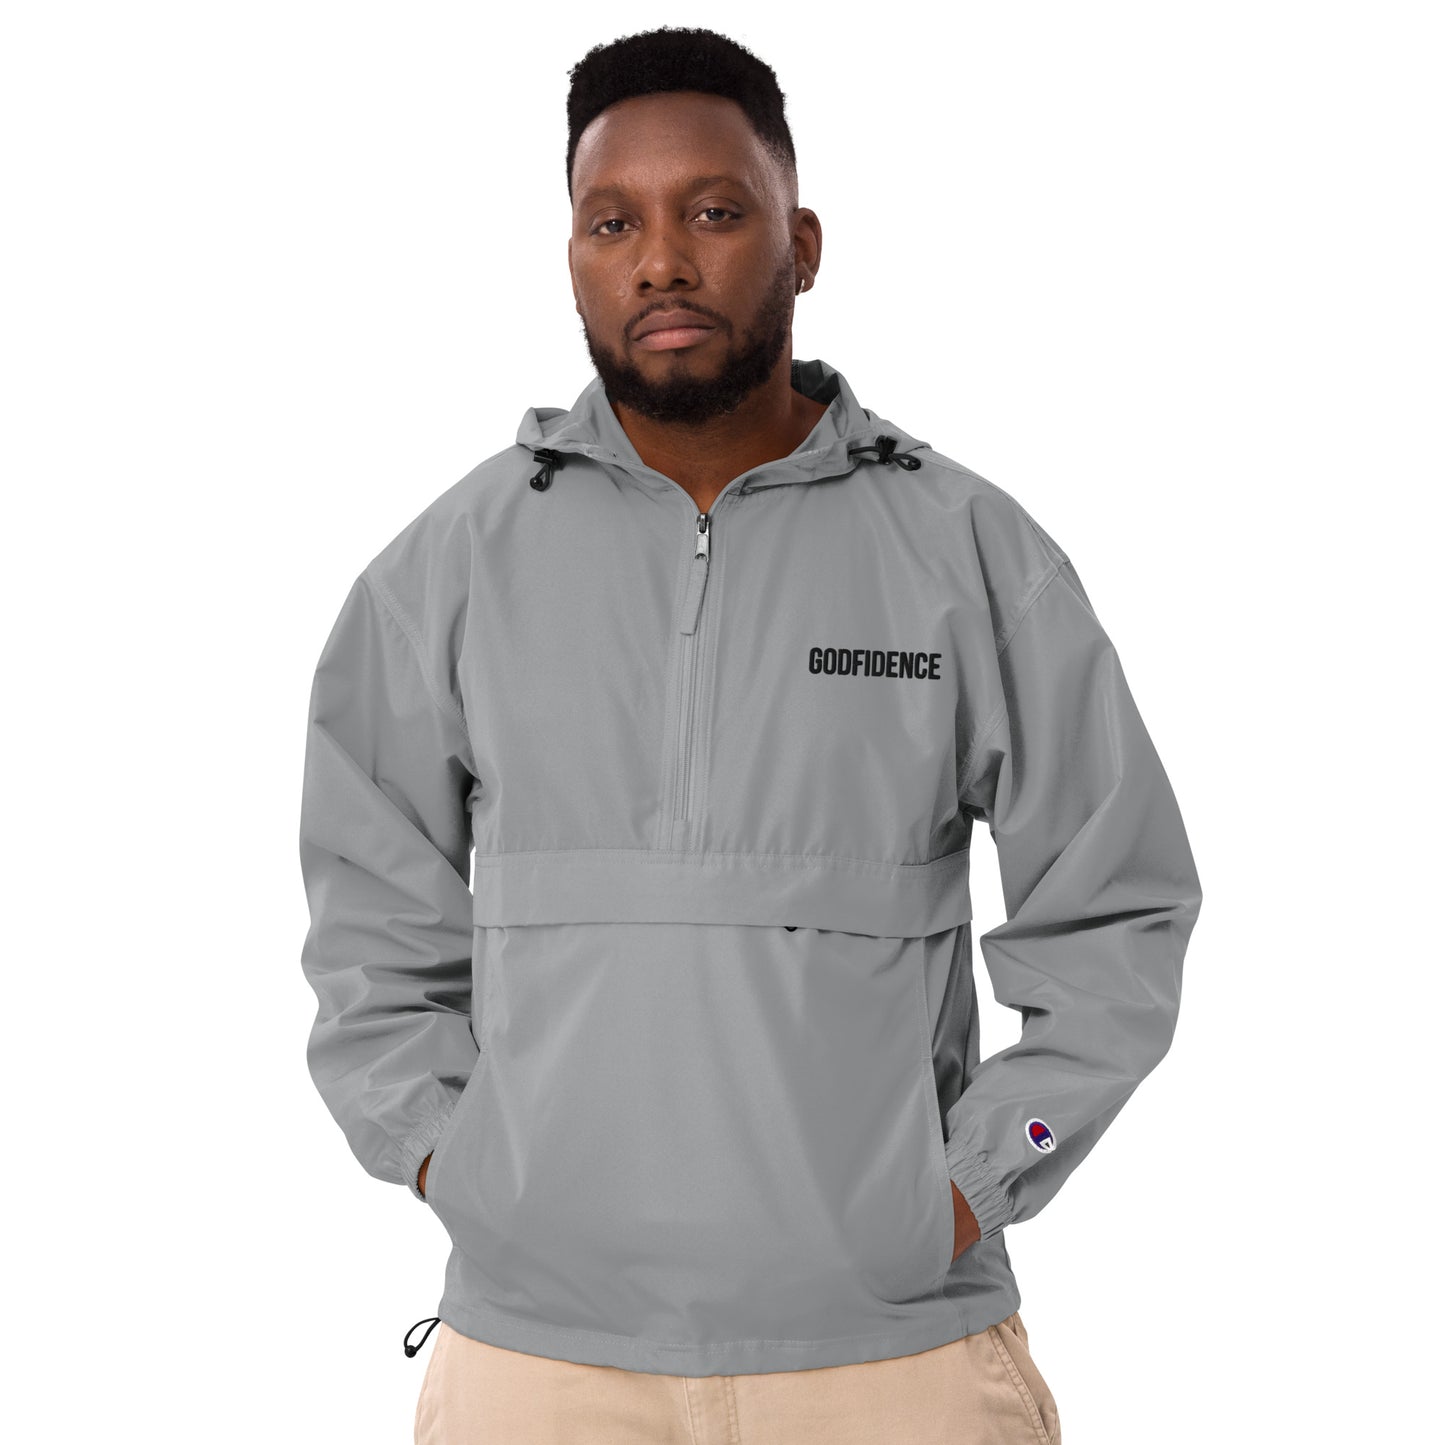 Godfidence Grey Embroidered Champion Packable Jacket